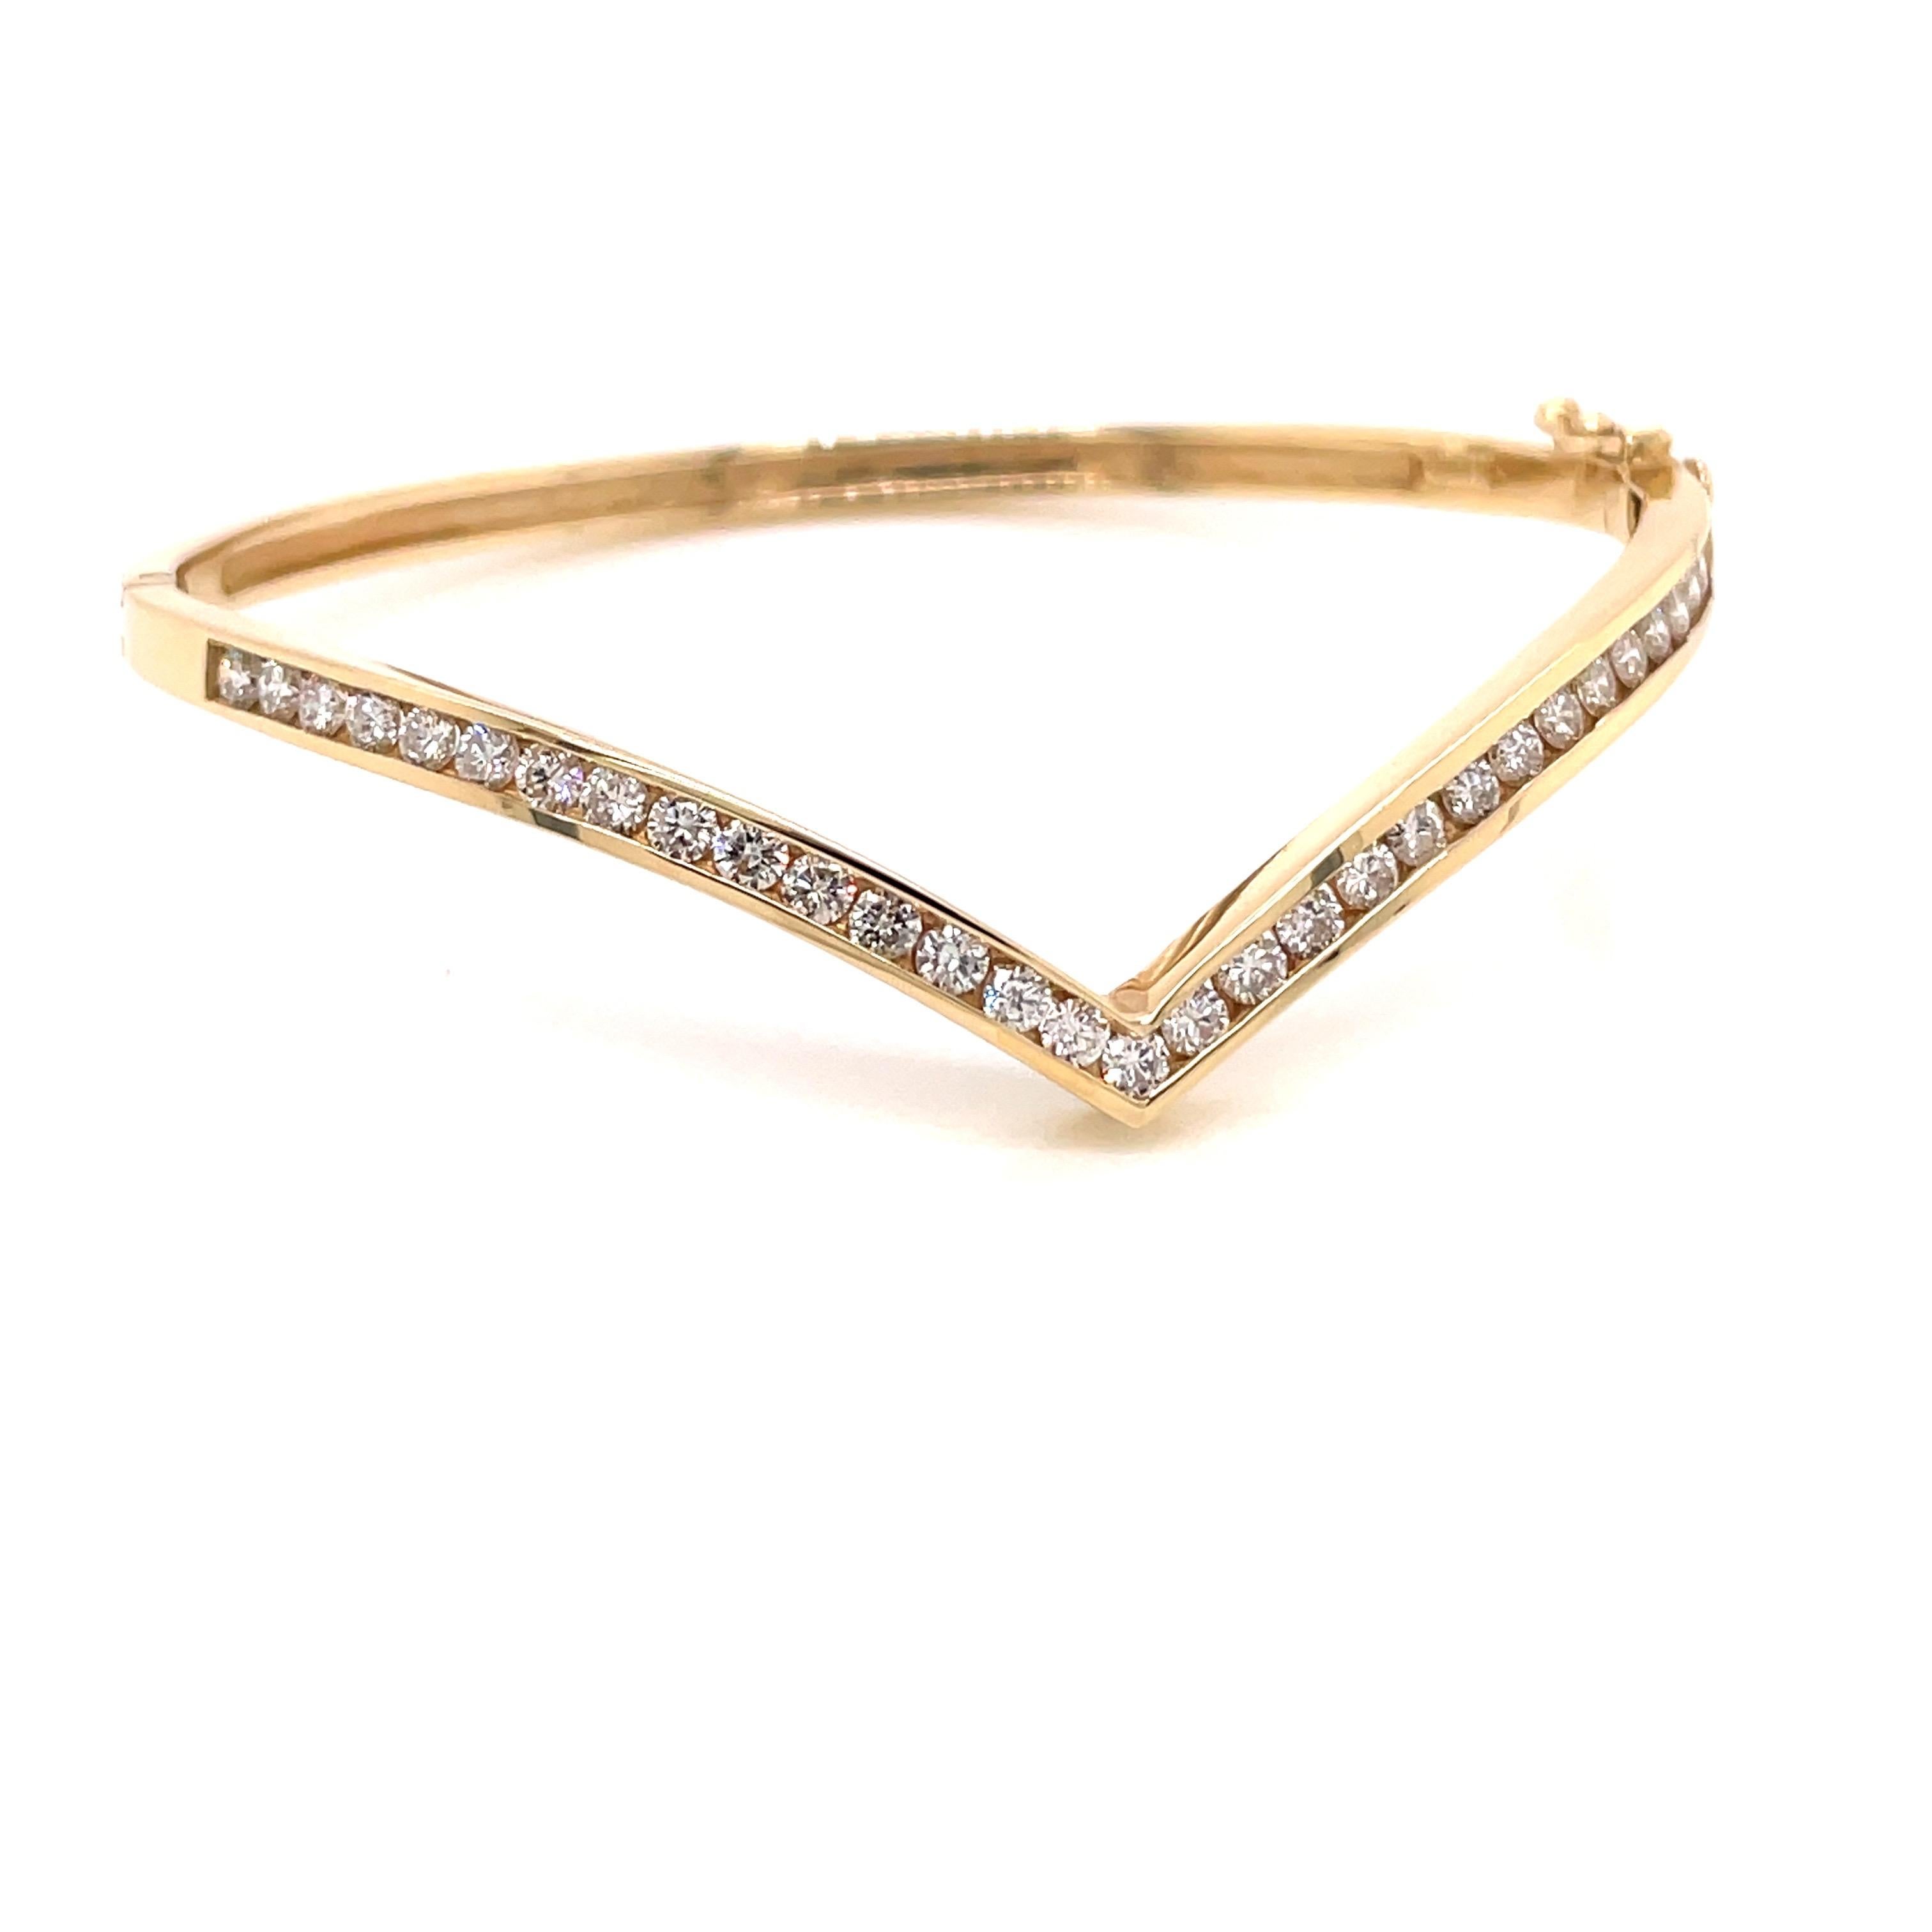 14K Yellow Gold Diamond Chevron Bangle Bracelet 1.39ct - The bangle is channel set with 31 round brilliant diamonds weighing 1.39ct with G - H color and VS2 - SI1 clarity. The width of the bangle is 3.2mm and the point of the chevron extends 1/2